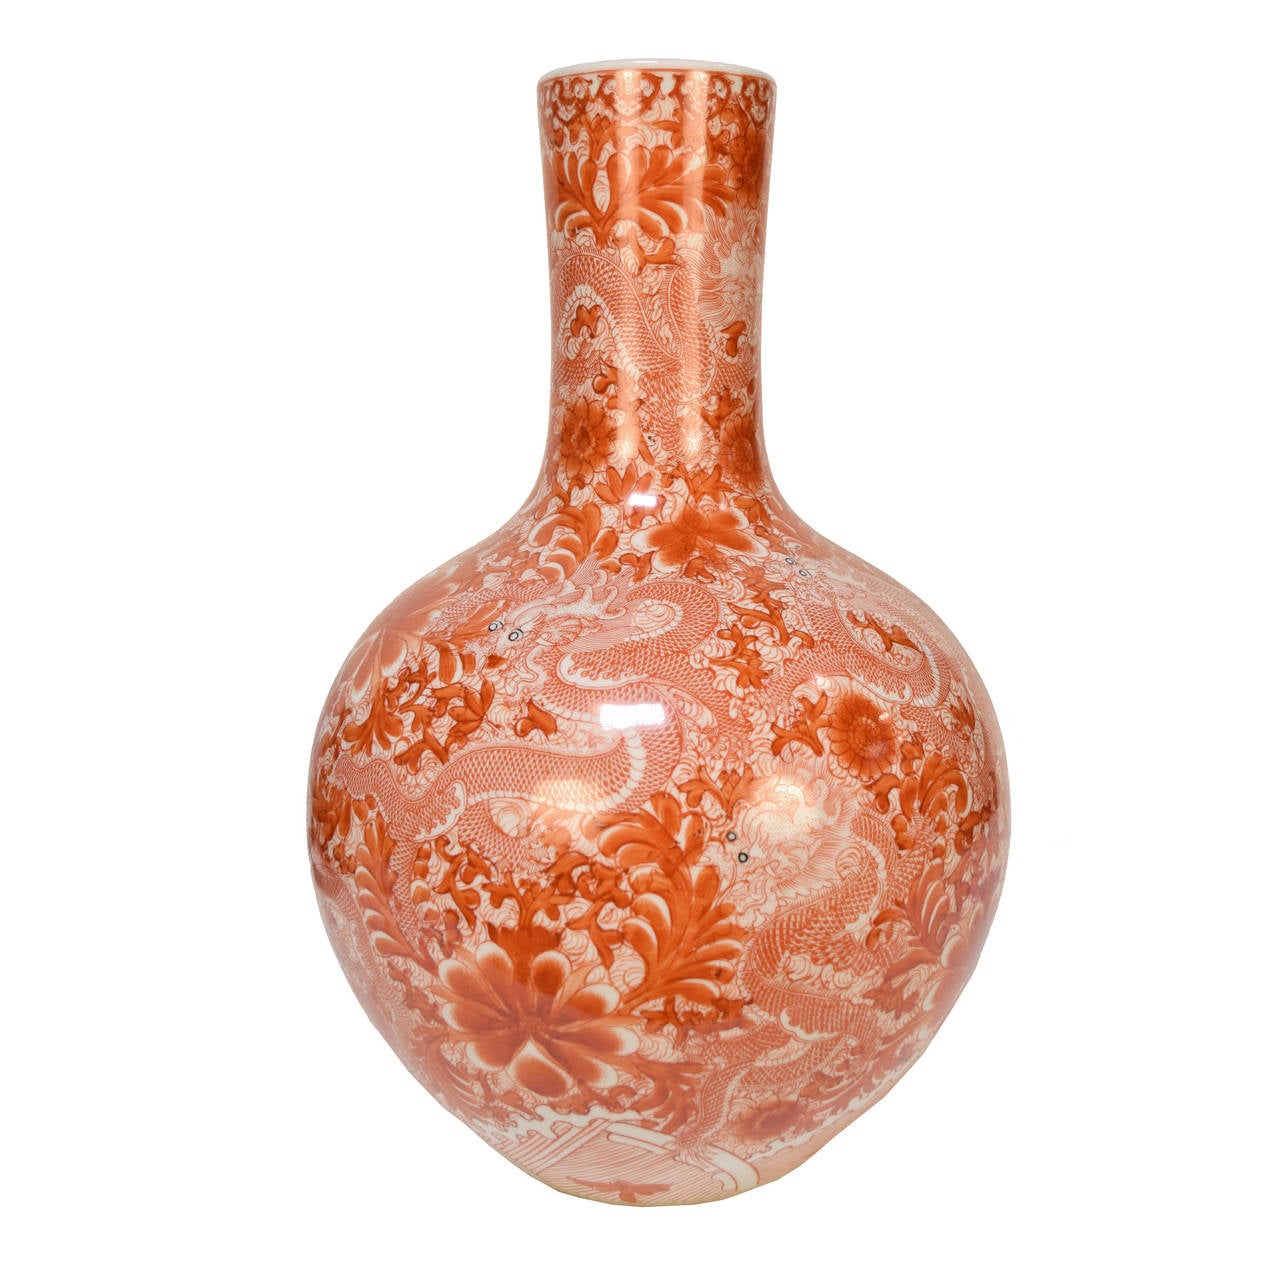 A pair of gooseneck form jars depicting dragons swirling amongst vines from Beijing, China. This beautiful orange color is gained by firing the jars with copper.

                